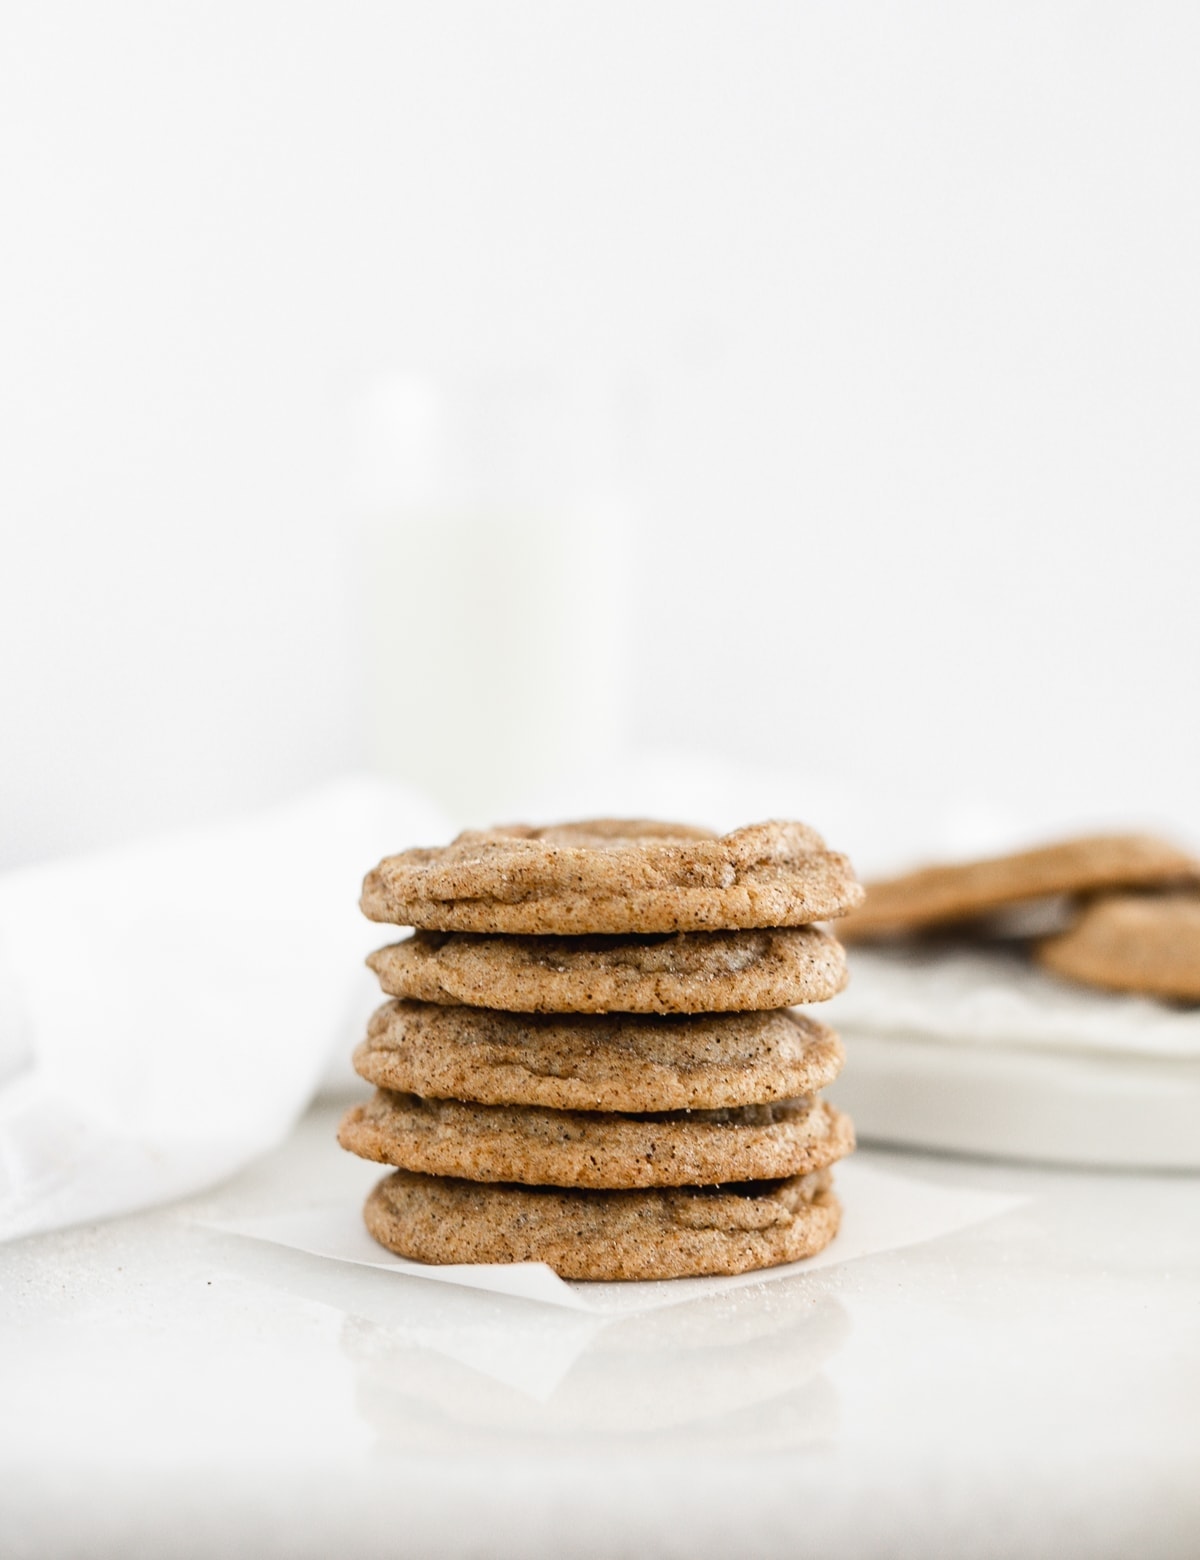 Chai Spiced Snickerdoodles have soft and buttery insides and sweet and spicy, slightly crunchy outsides. The perfect cookies for pairing with a cup of tea. (vegetarian, dairy-free option) via livelytable.com